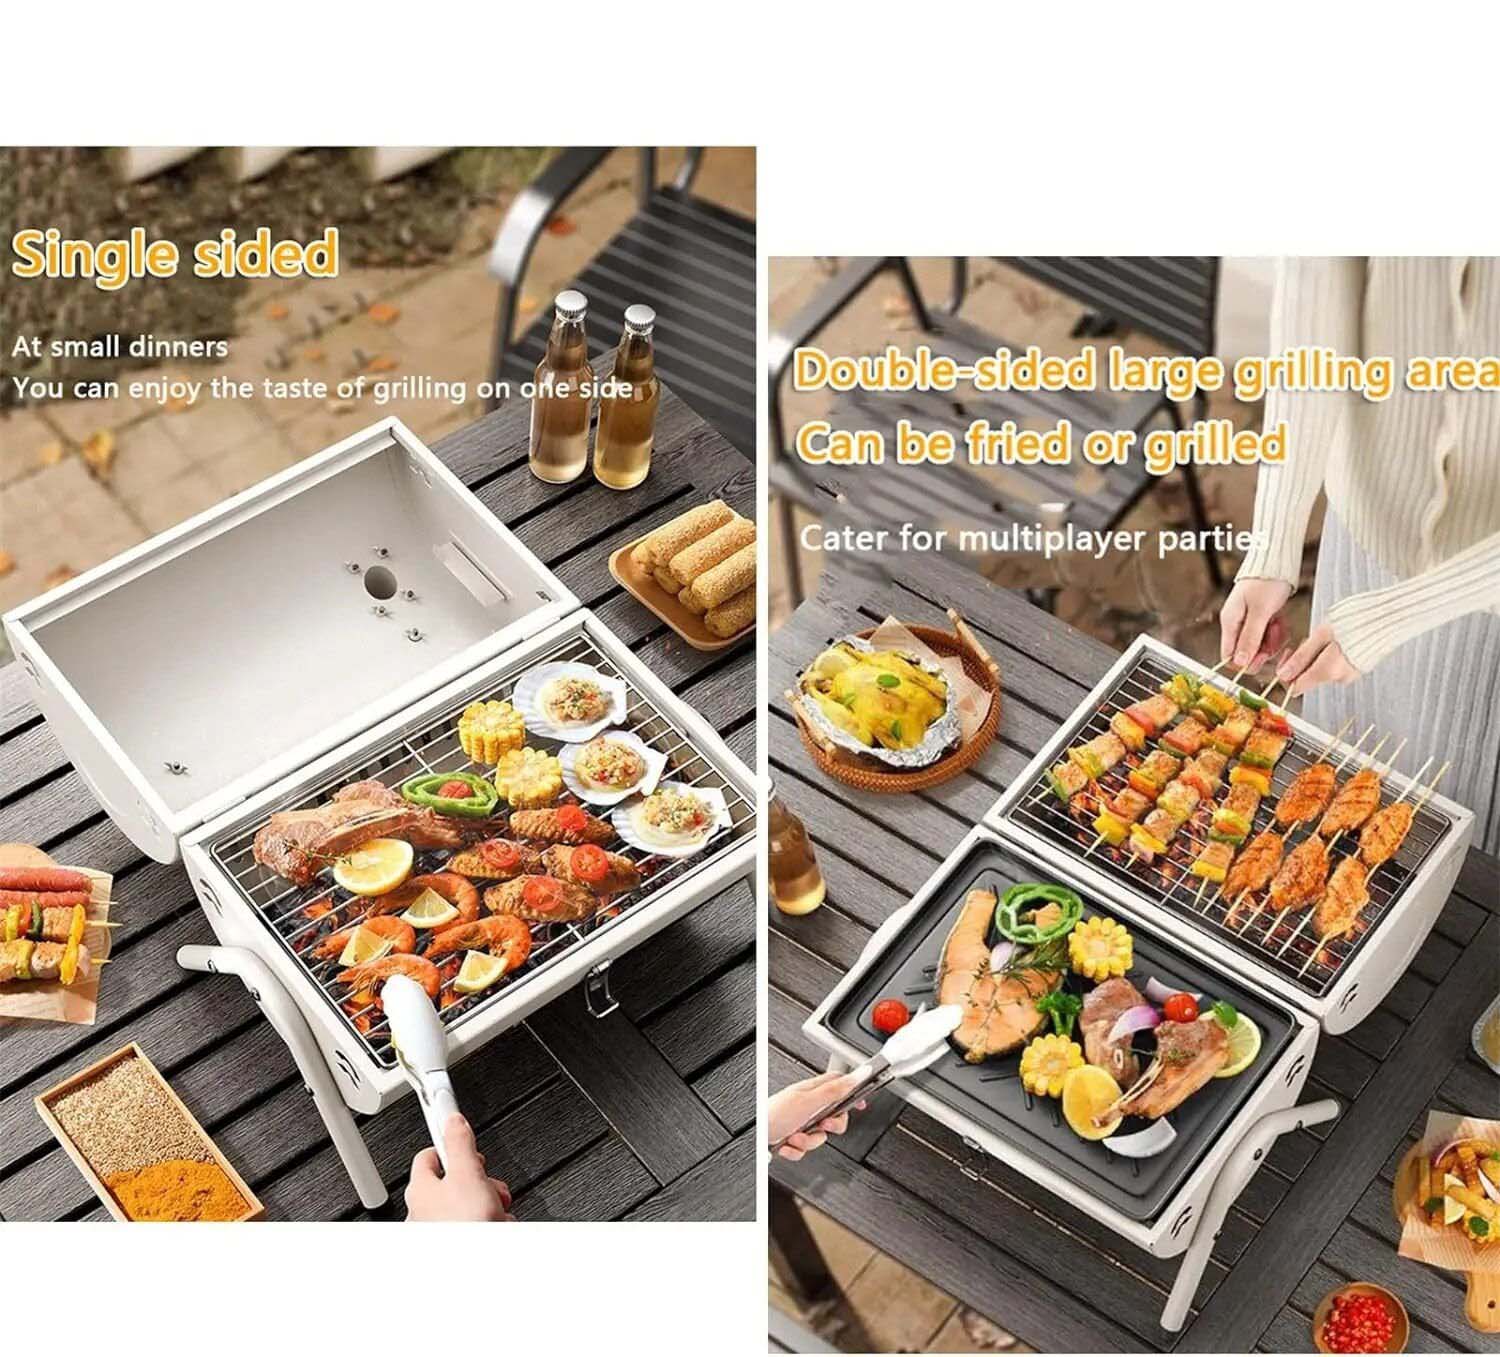 Portable charcoal grill with smoker